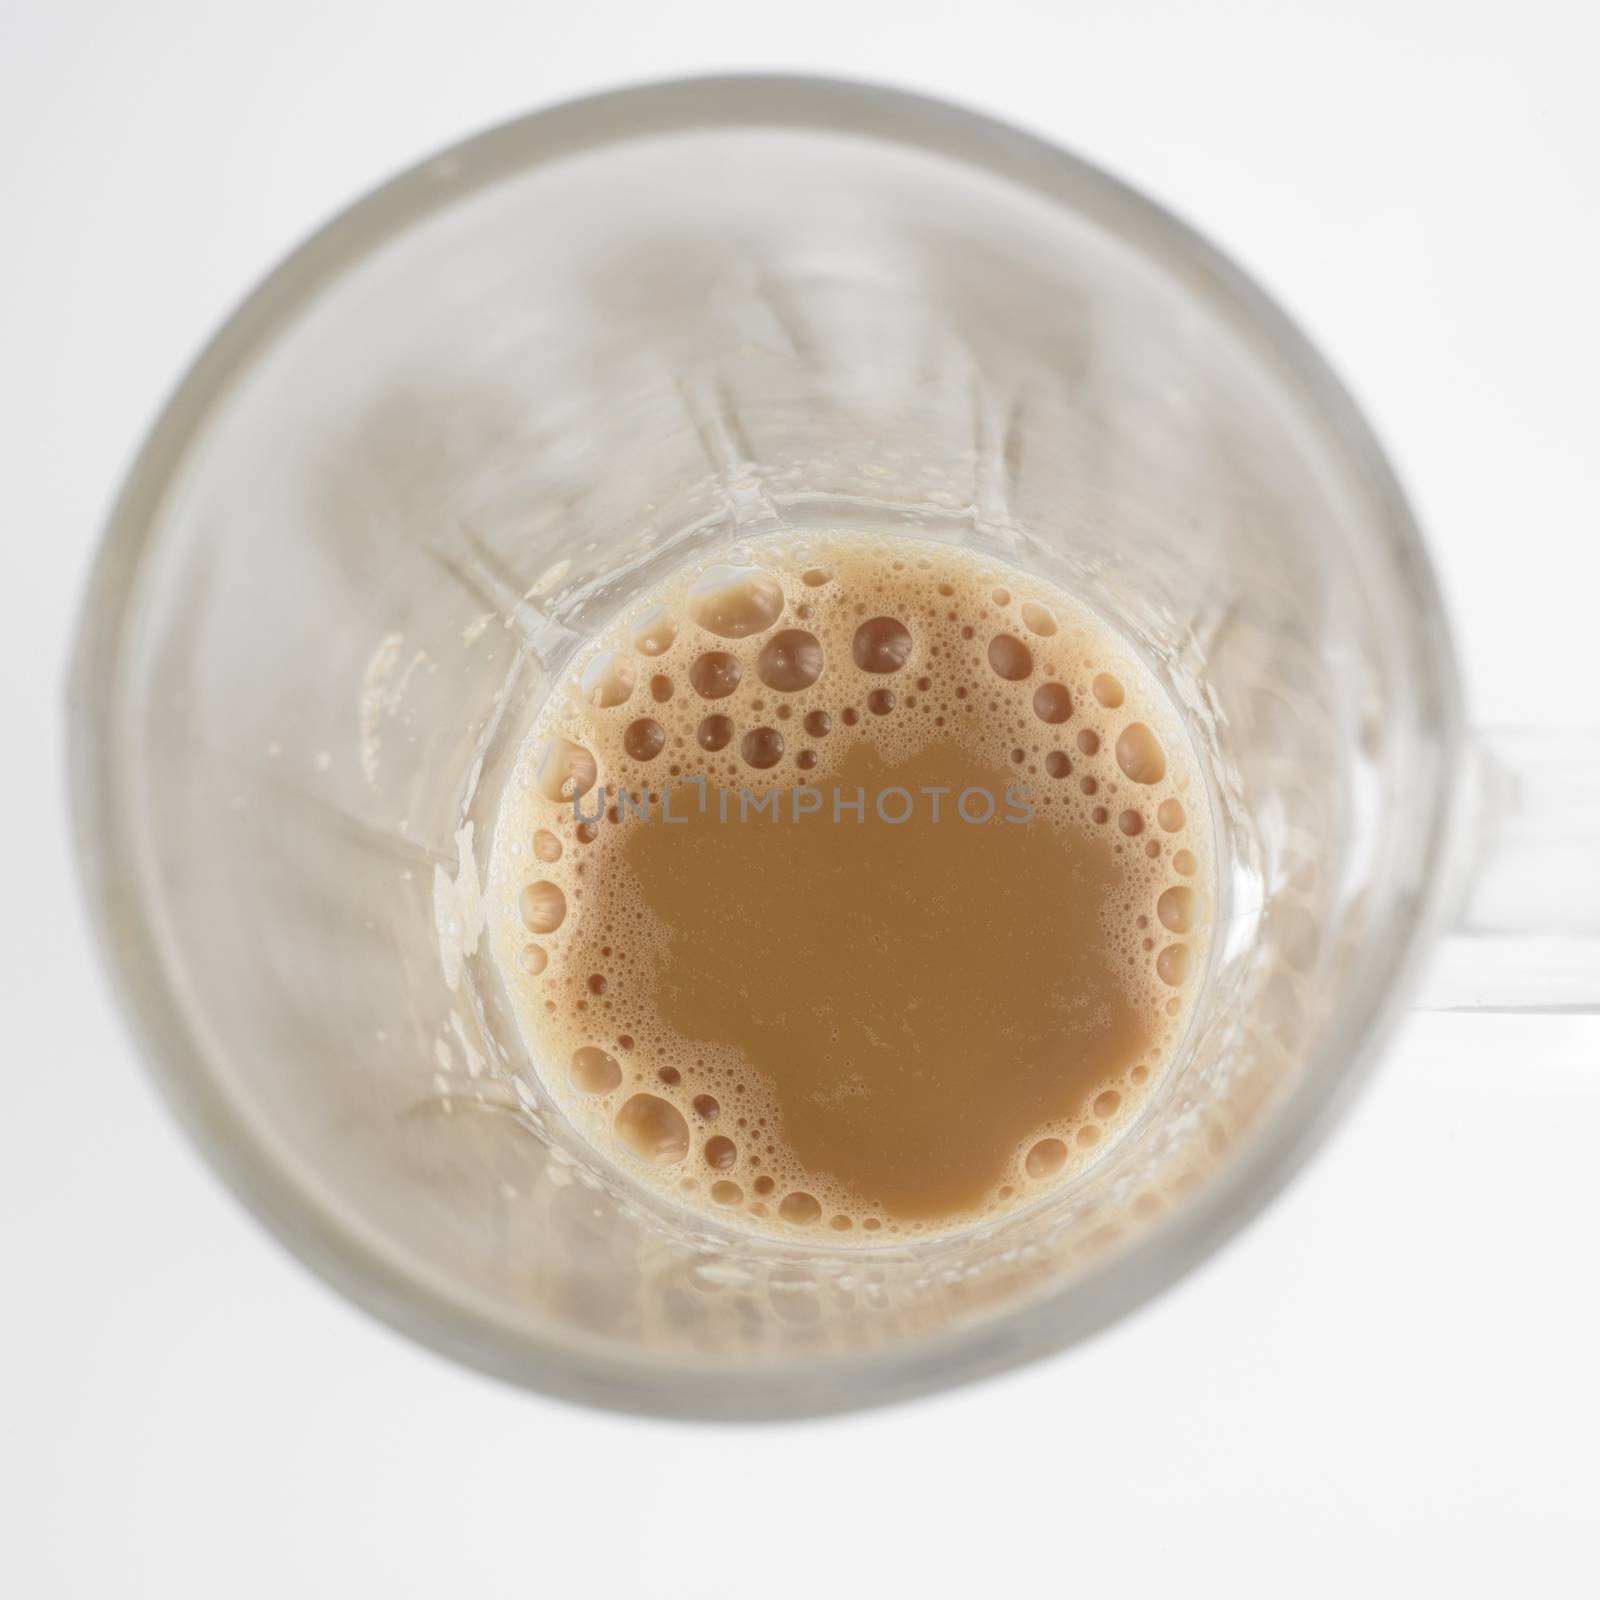 Top view of lnearly empth glass with little Tea with milk or Teh Tarik in Malaysia